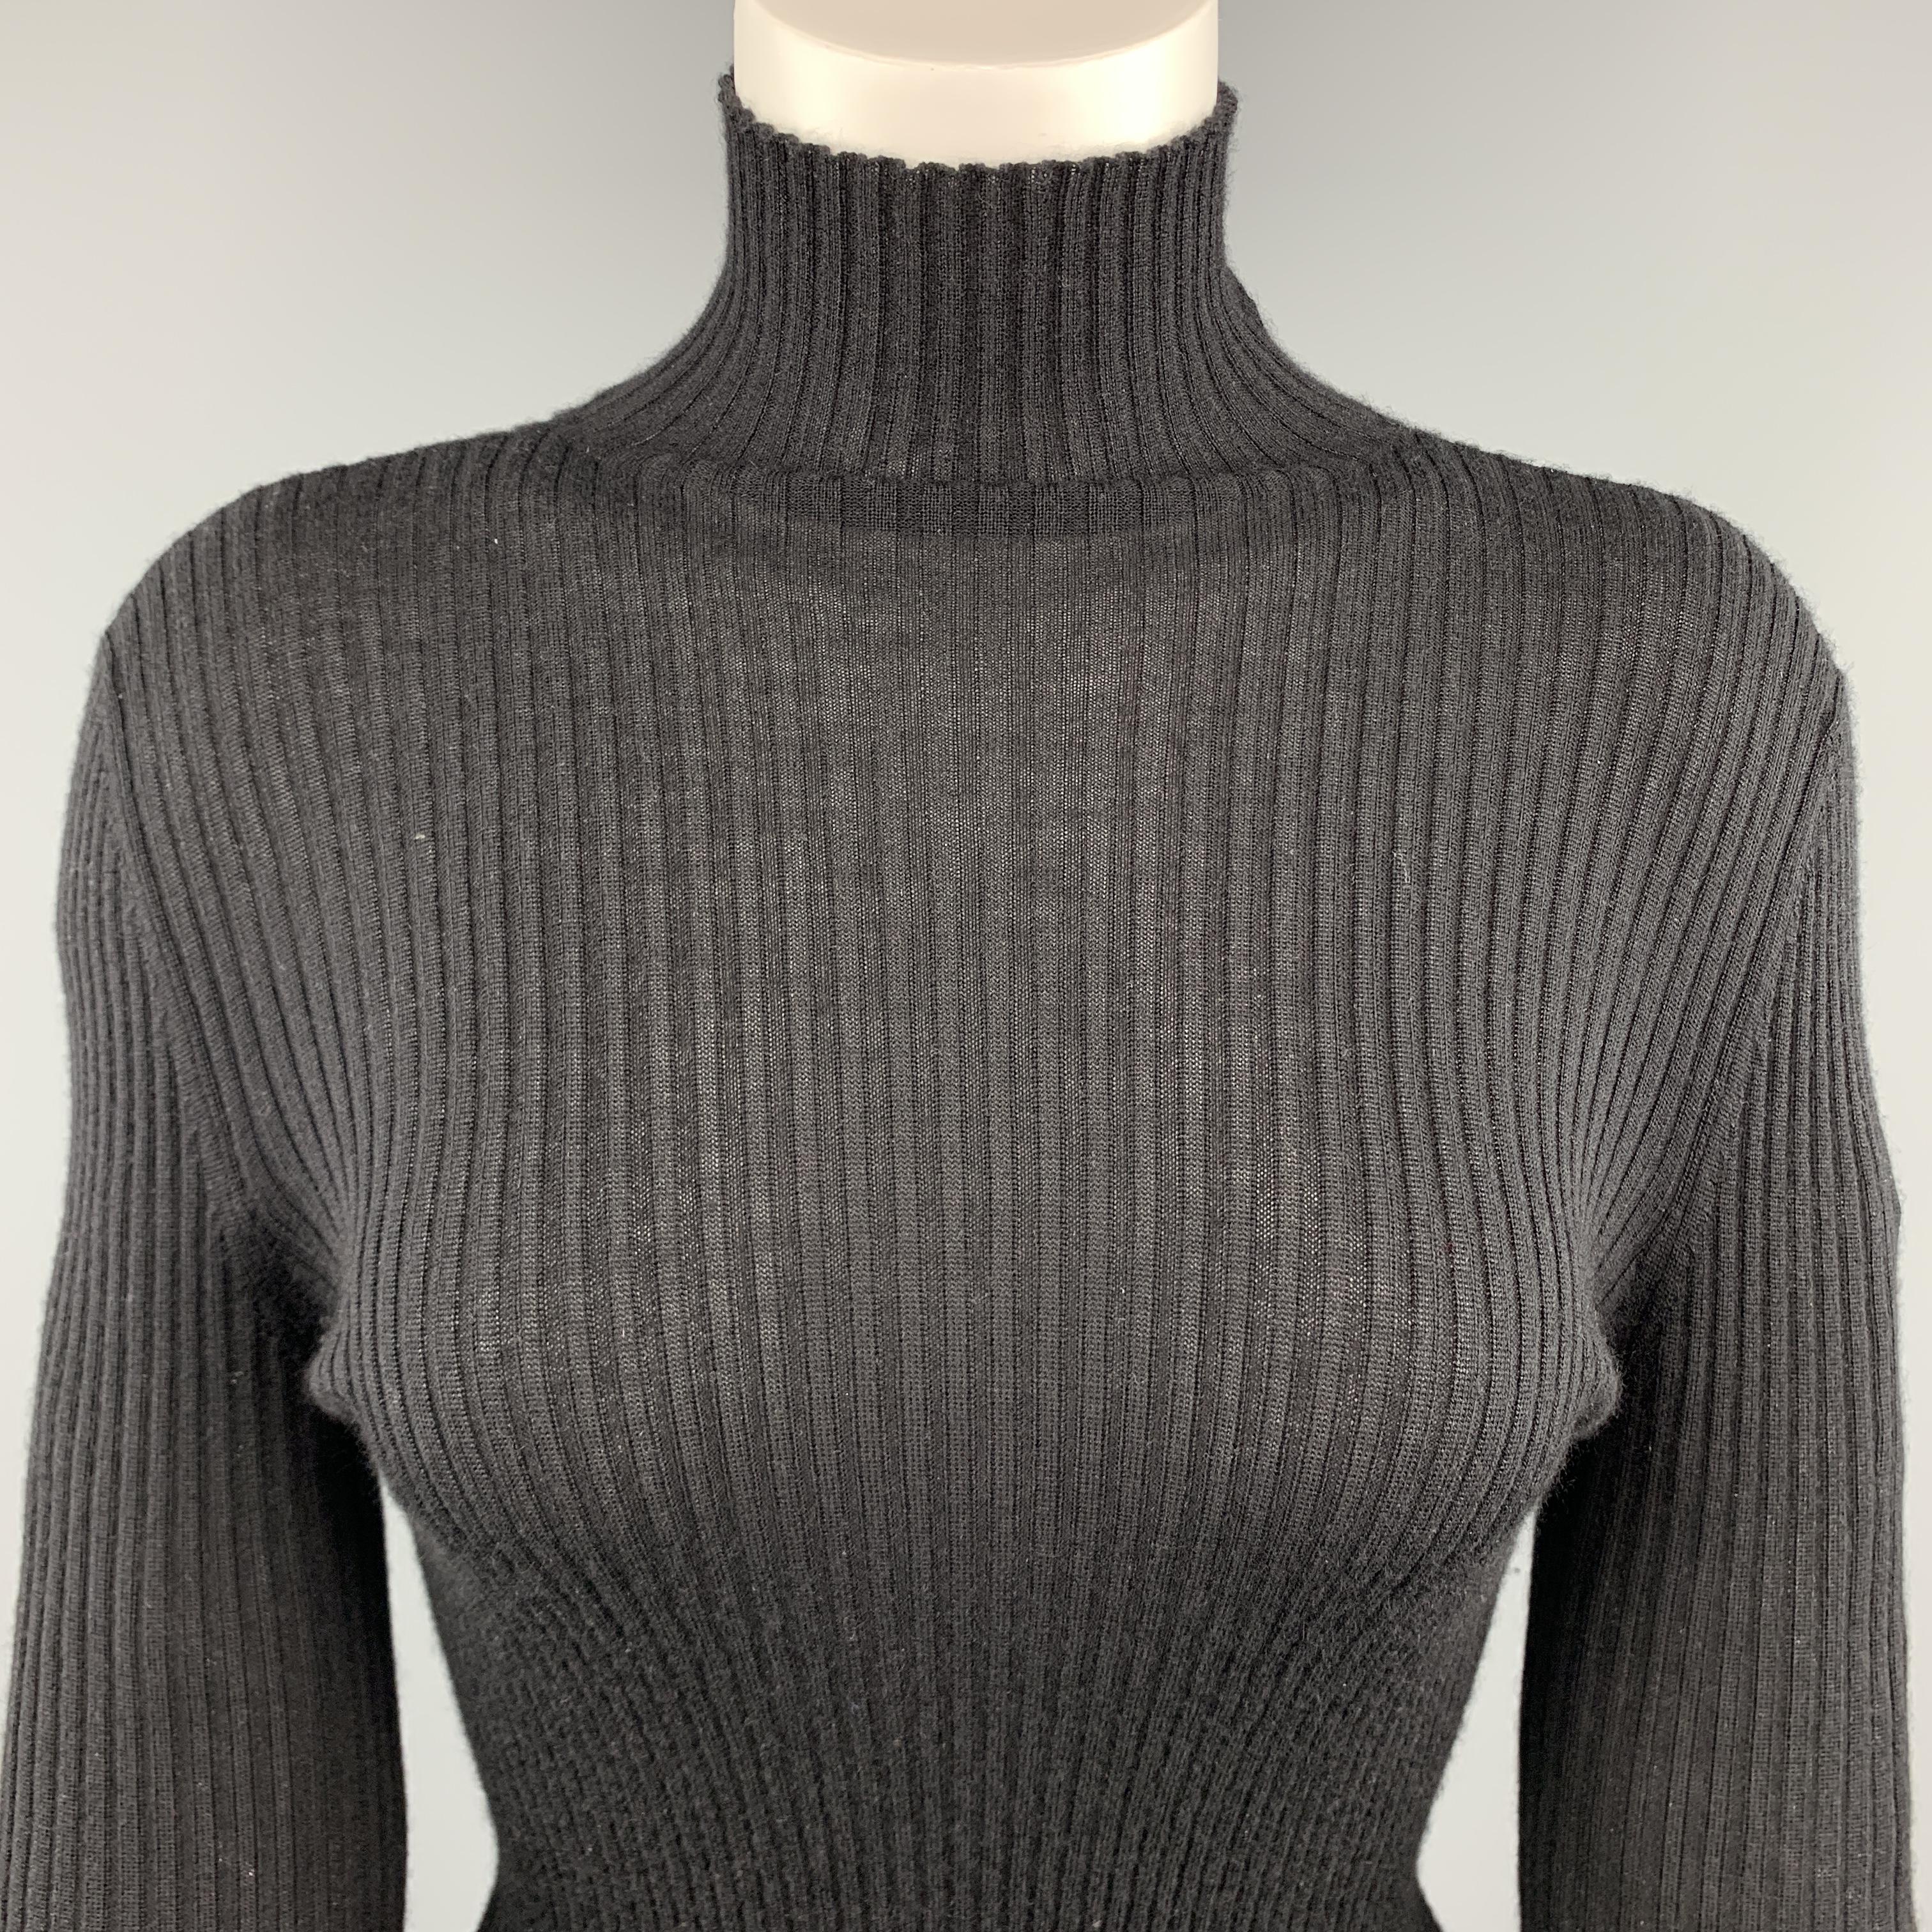 JIL SANDER pullover sweater comes in sheer cashmere silk blend ribbed nit with a stand up turtleneck collar. Made in Italy.

Excellent Pre-Owned Condition.
Marked: IT 42

Measurements:

Shoulder: 15 in.
Bust: 34 in.
Sleeve: 28 in.
Length: 26.5 in. 